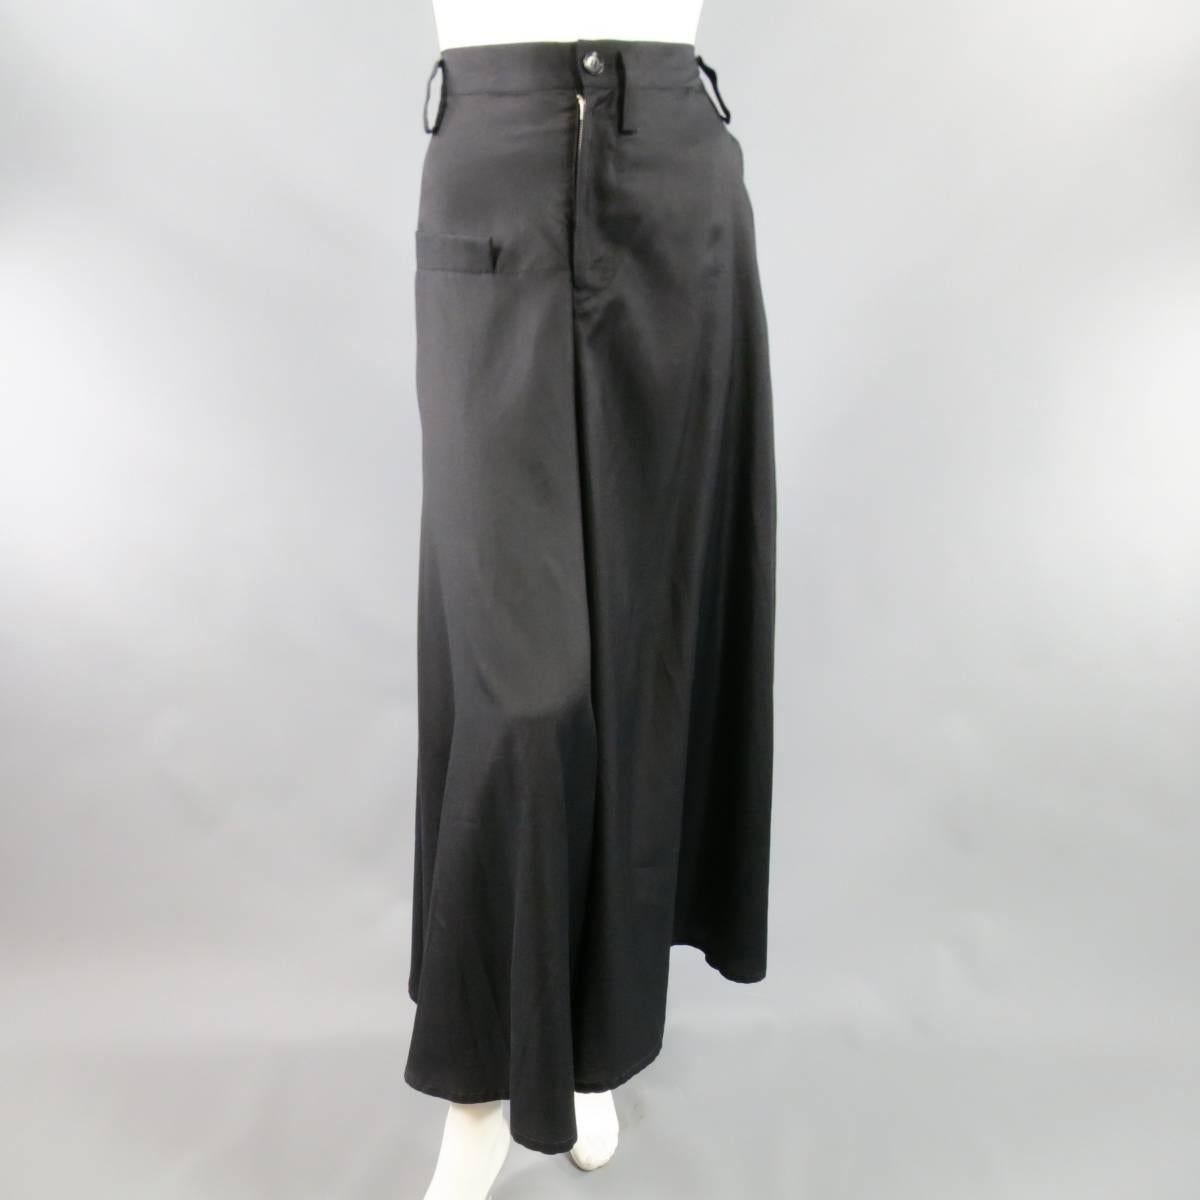 These fabulous YOHJI YAMAMOTO drop crotch dress pants come in an ultra light weight cotton rayon twill and feature an asymmetrical piping detail, back pleat, and extreme cropped wide leg. Made in Japan.
 
Excellent Pre-owned Condition.
Marked: